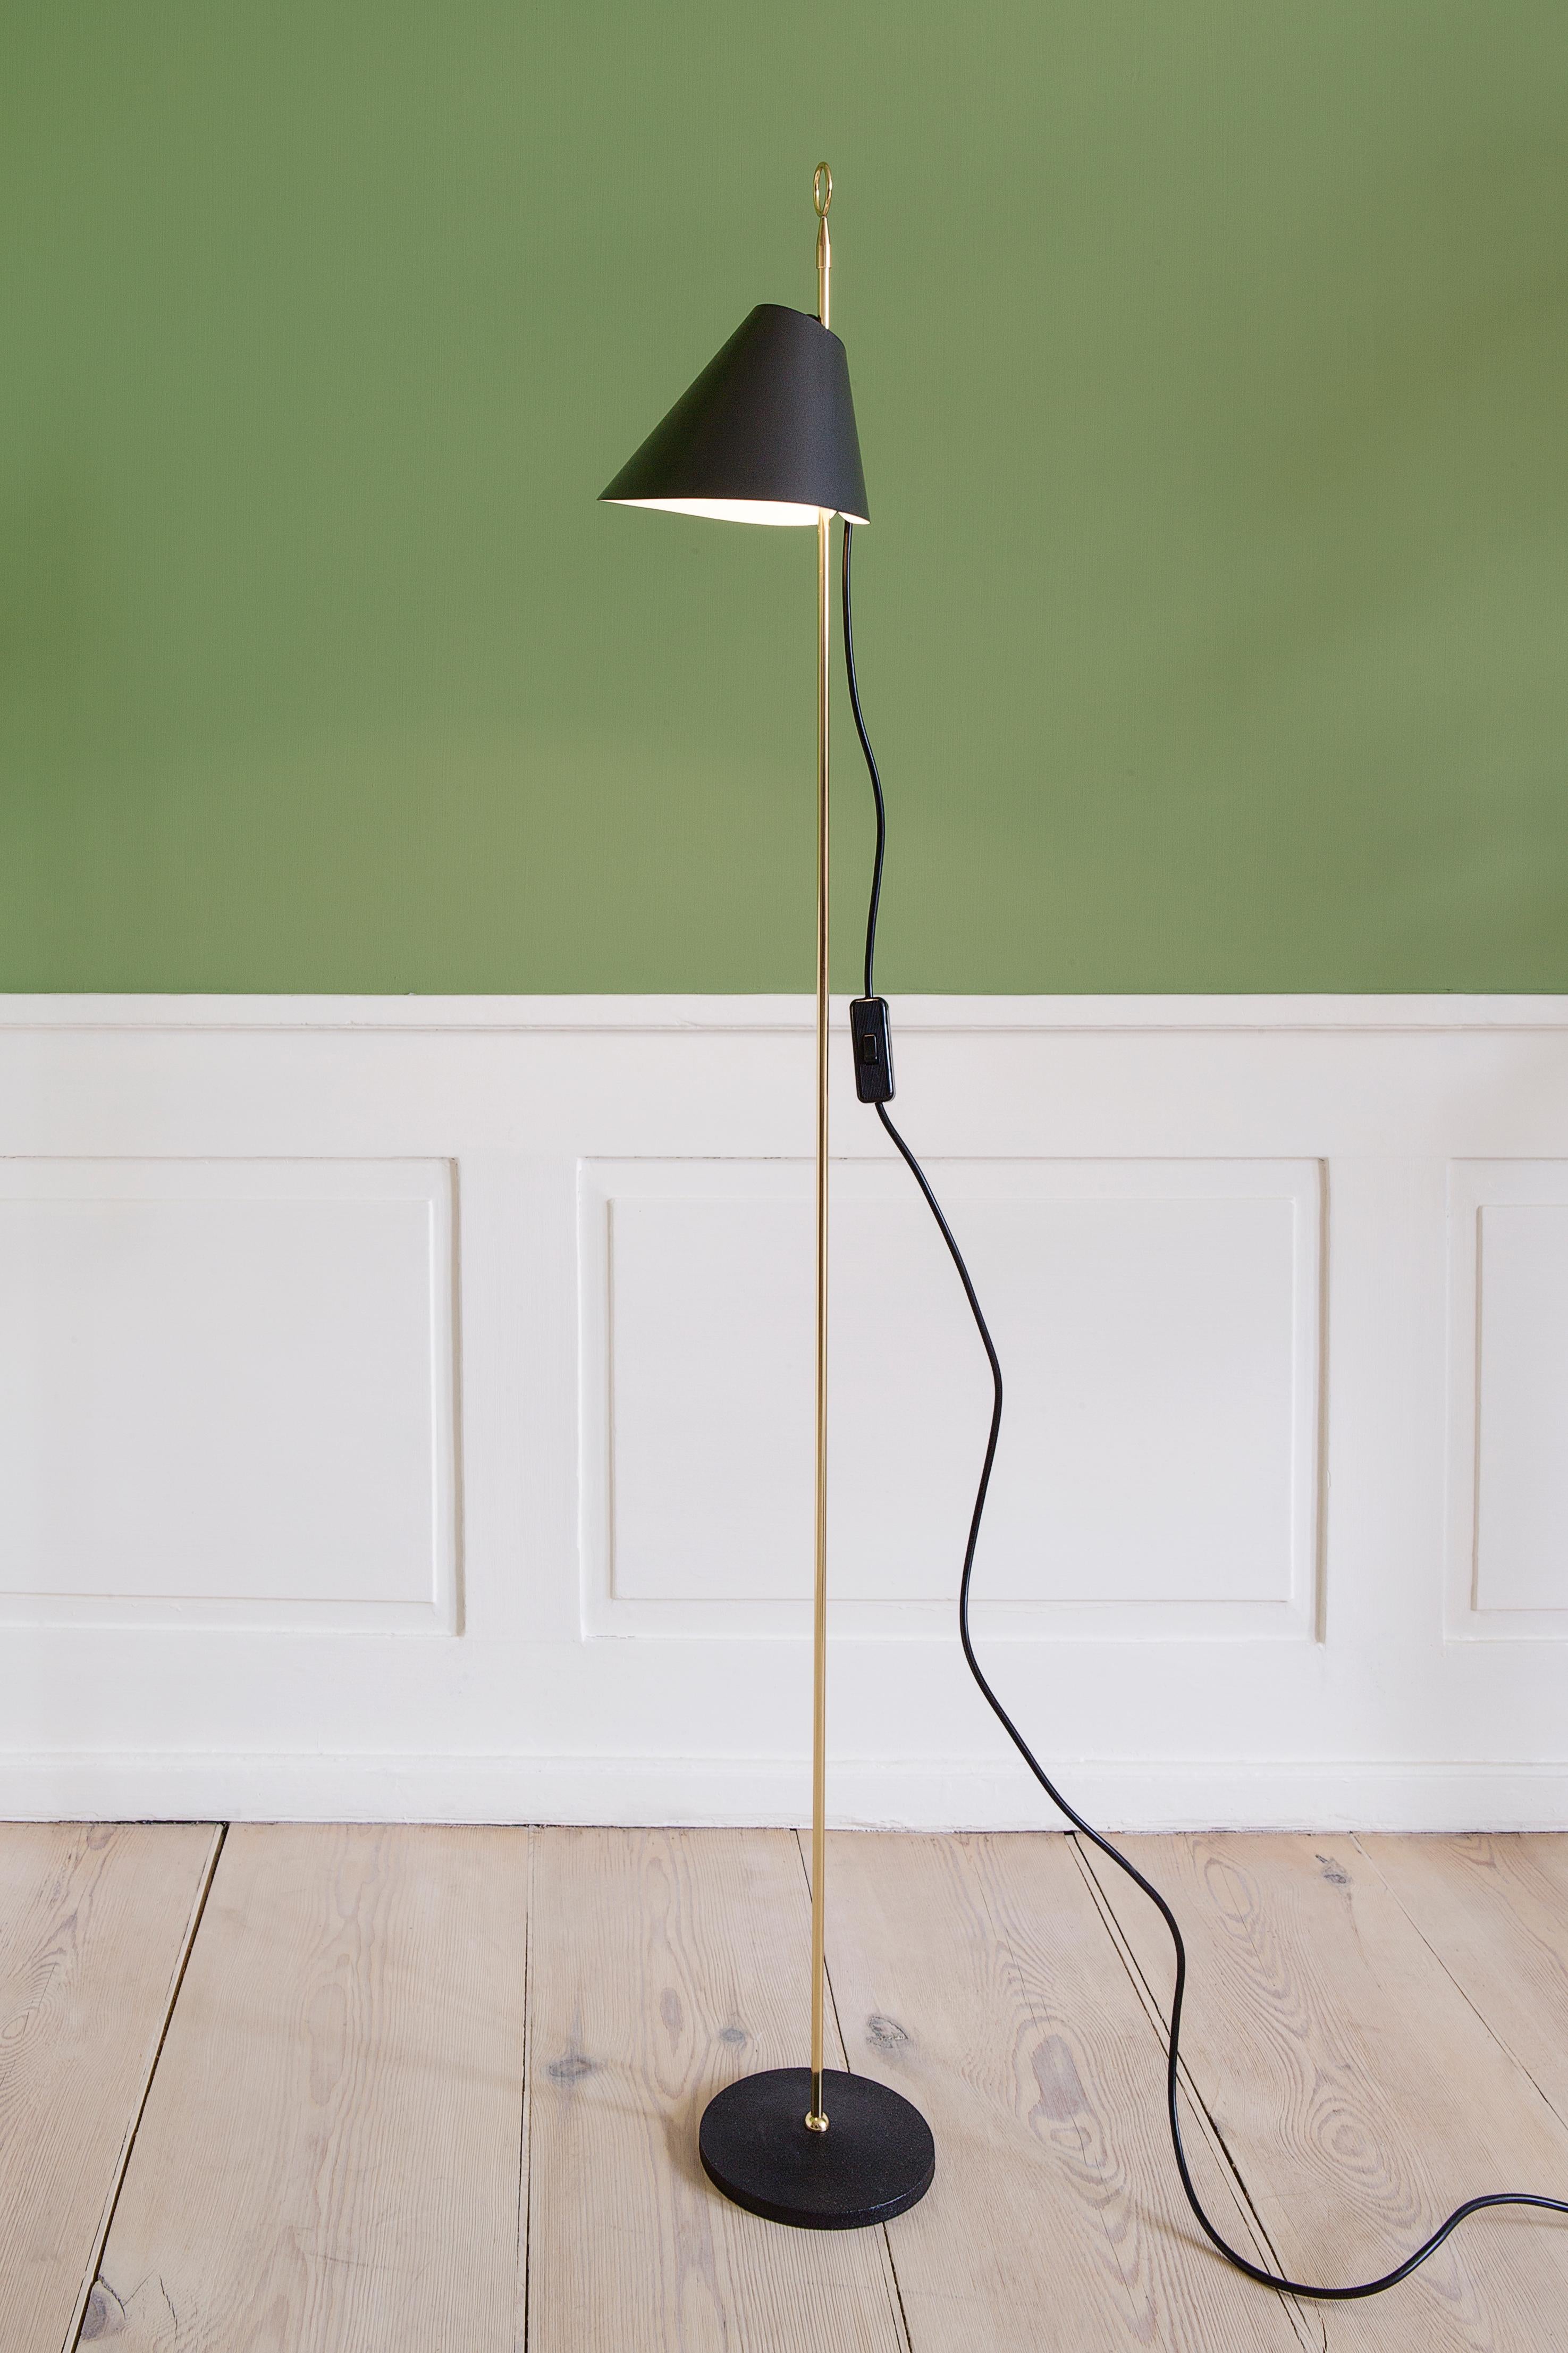 Azucena
Italy, contemporary

Monachella floor lamp. Stem in polished brass and base in black painted cast iron. Sliding reflector in metallic grey aluminium.

Designed by Luigi Caccia Dominioni in 1953 for Azucena. Contemporary re-edition made